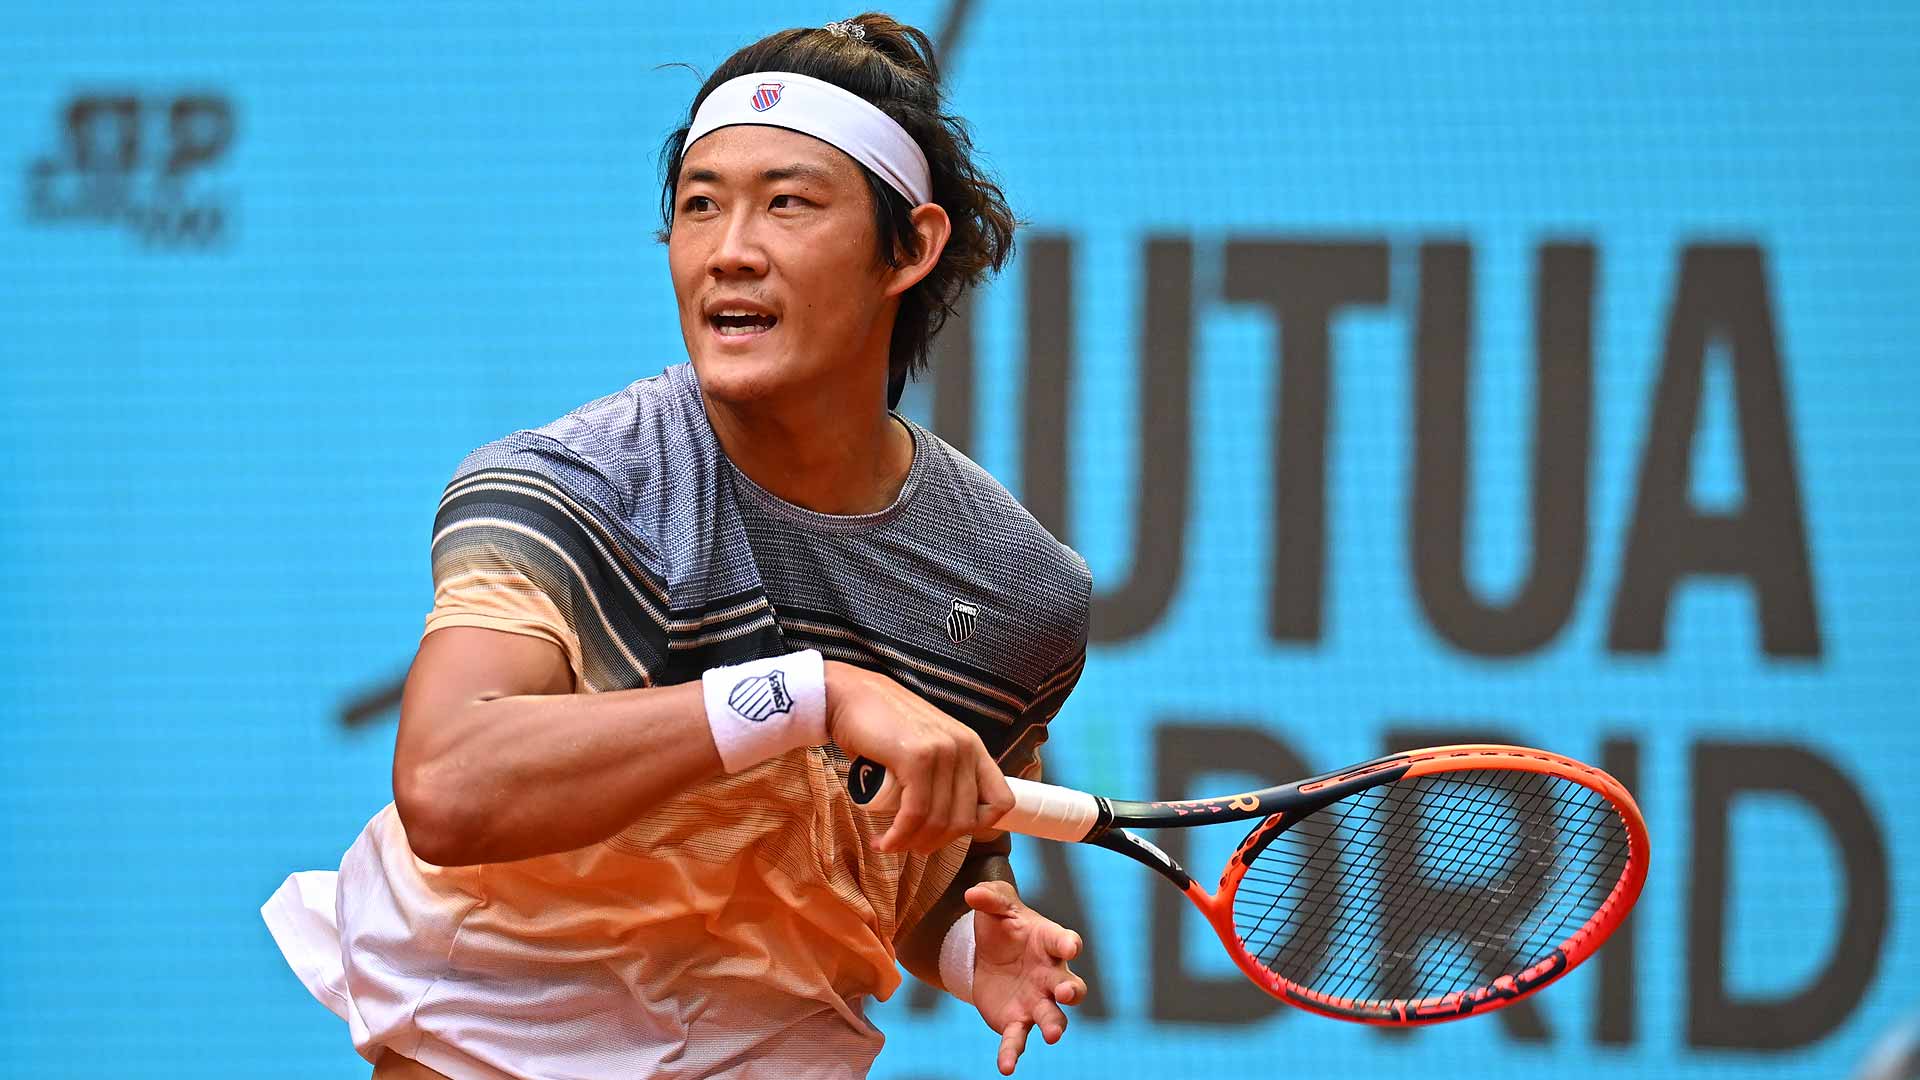 Zhang Zhizhen advances to his first ATP Masters 1000 quarter-final after claiming his first Top 10 win.